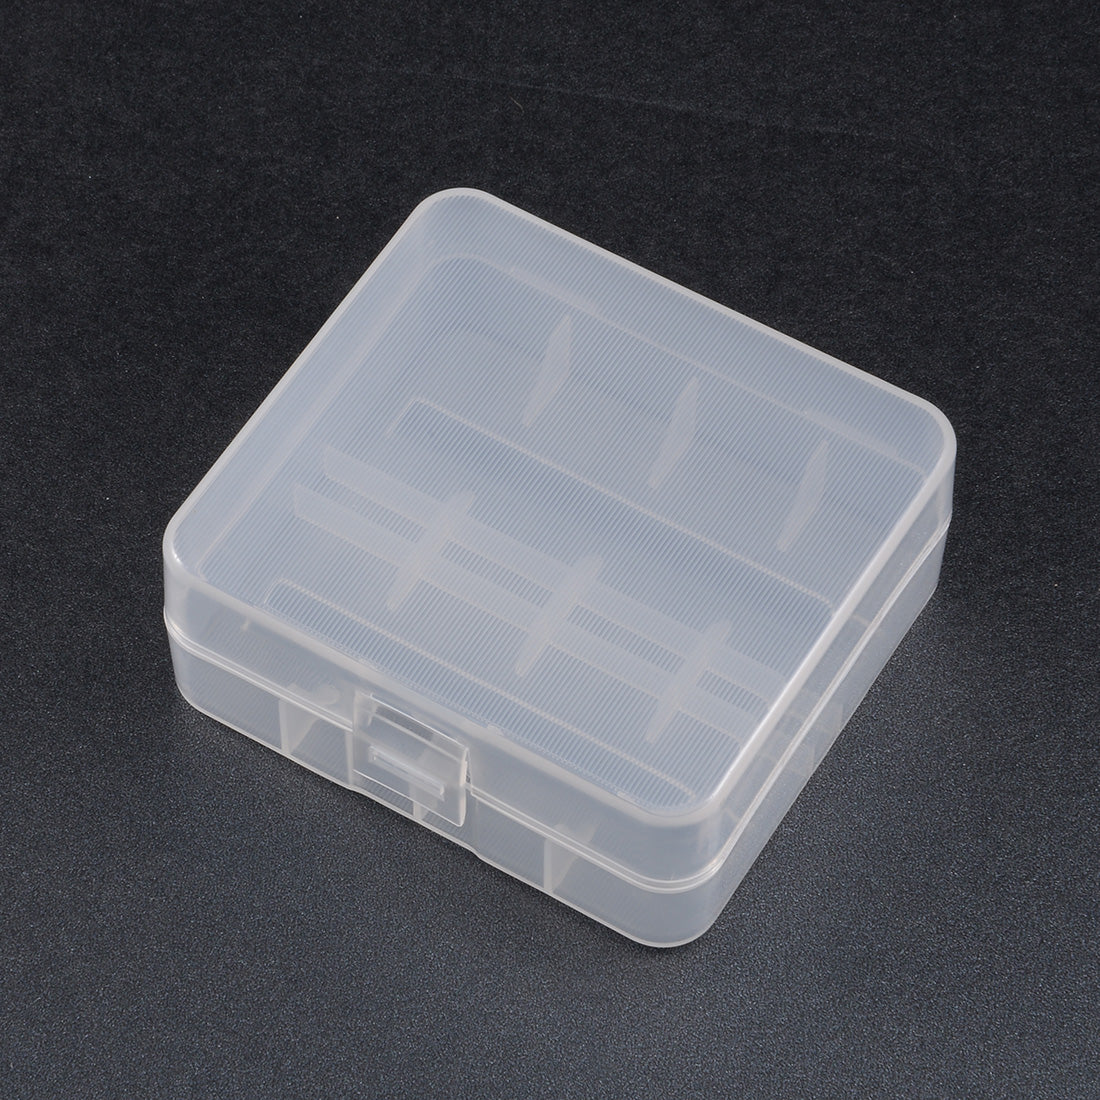 uxcell Uxcell Transparent Plastic Battery Organizer Case Holder Storage Box Container for 26650 Battery